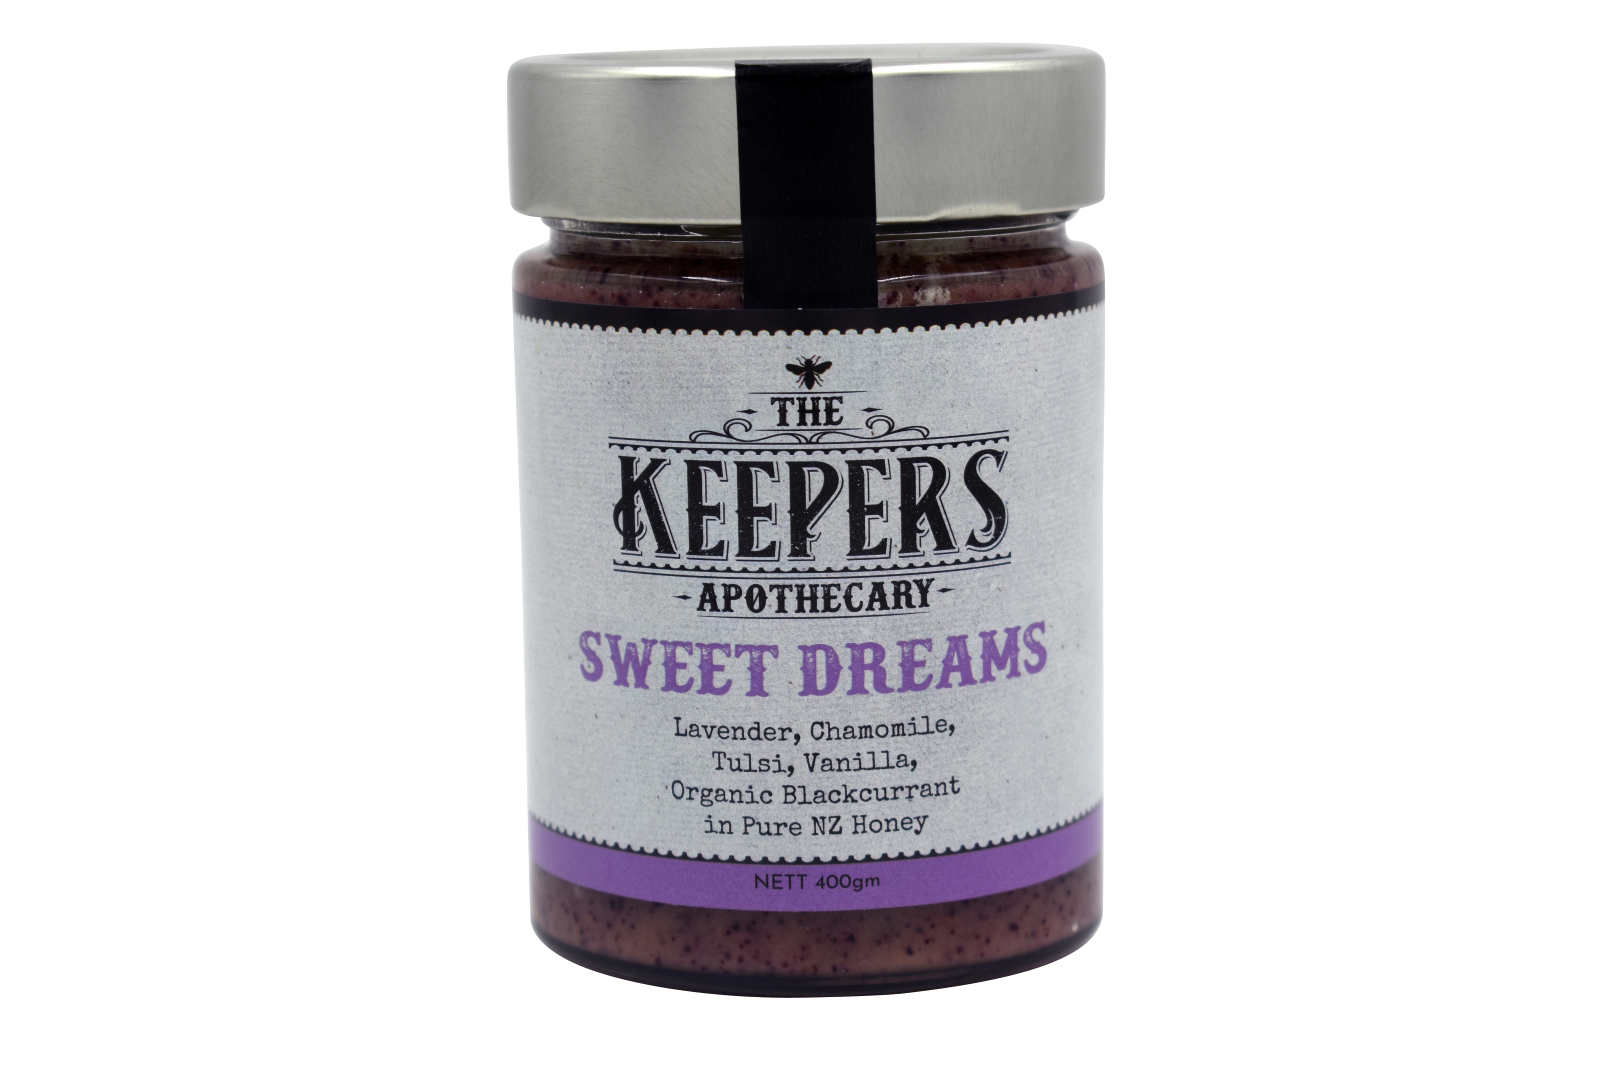 The Keepers Apothecary Sweet Dreams 400g